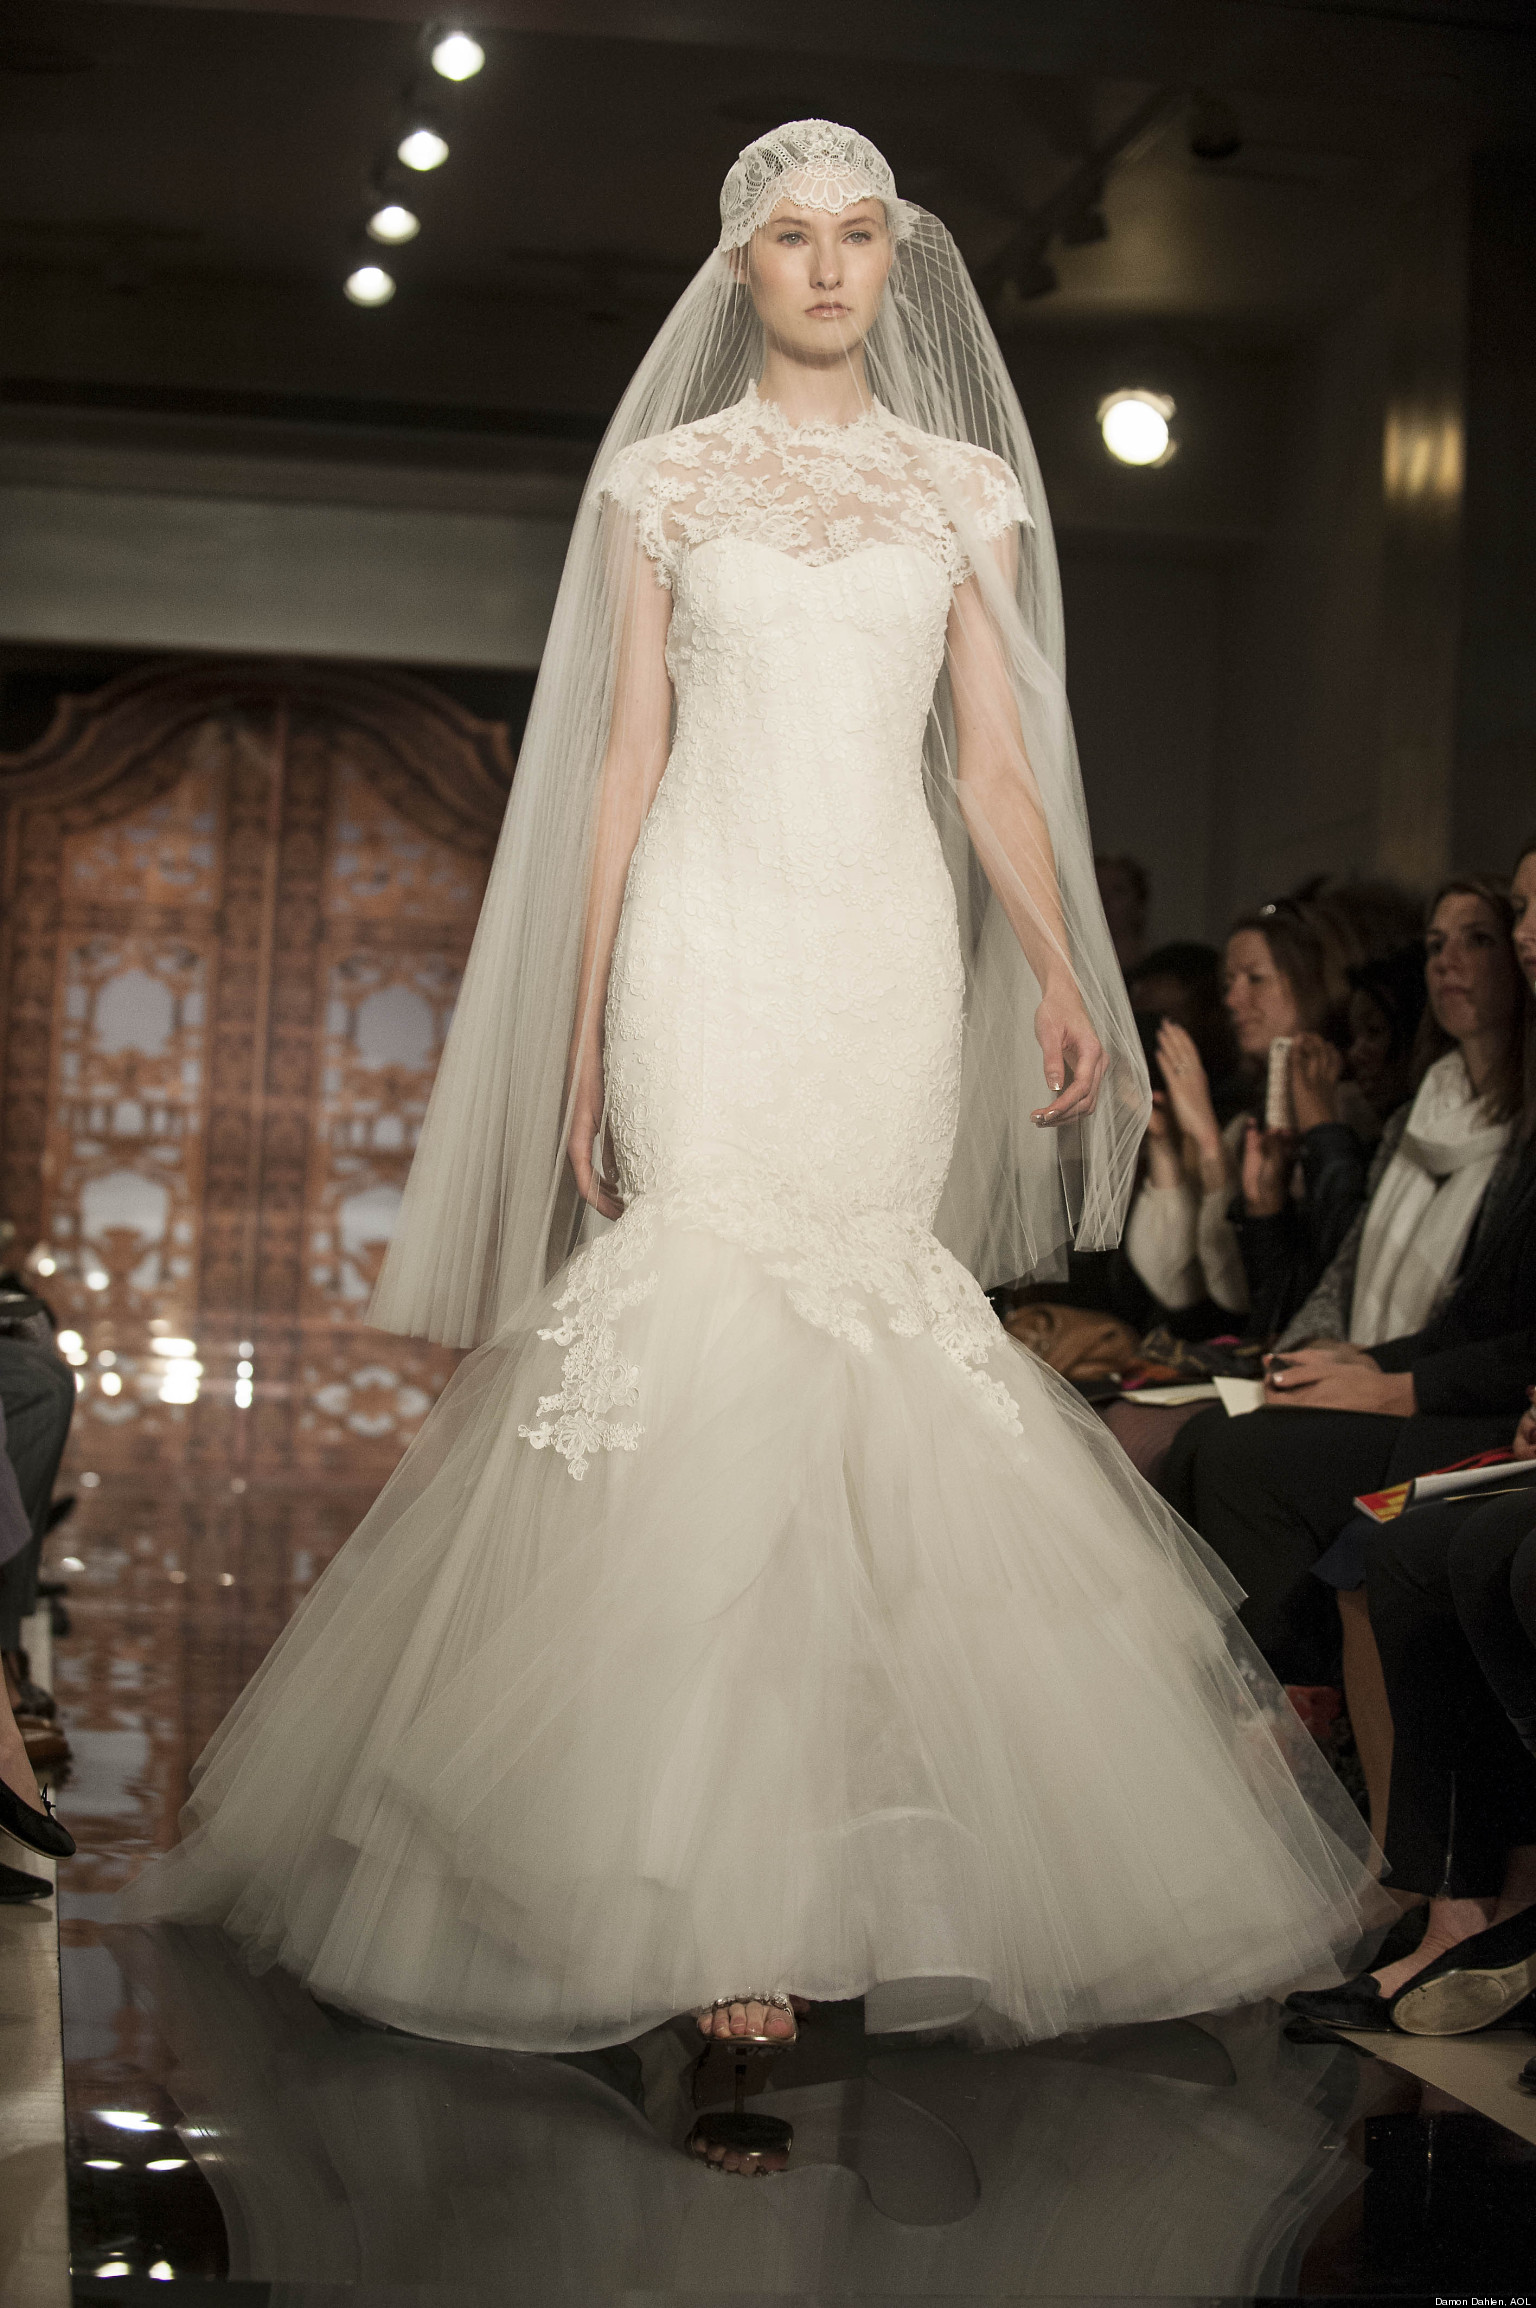 Wedding Dress Trends: Top Designers Reveal Their Favorite Looks For